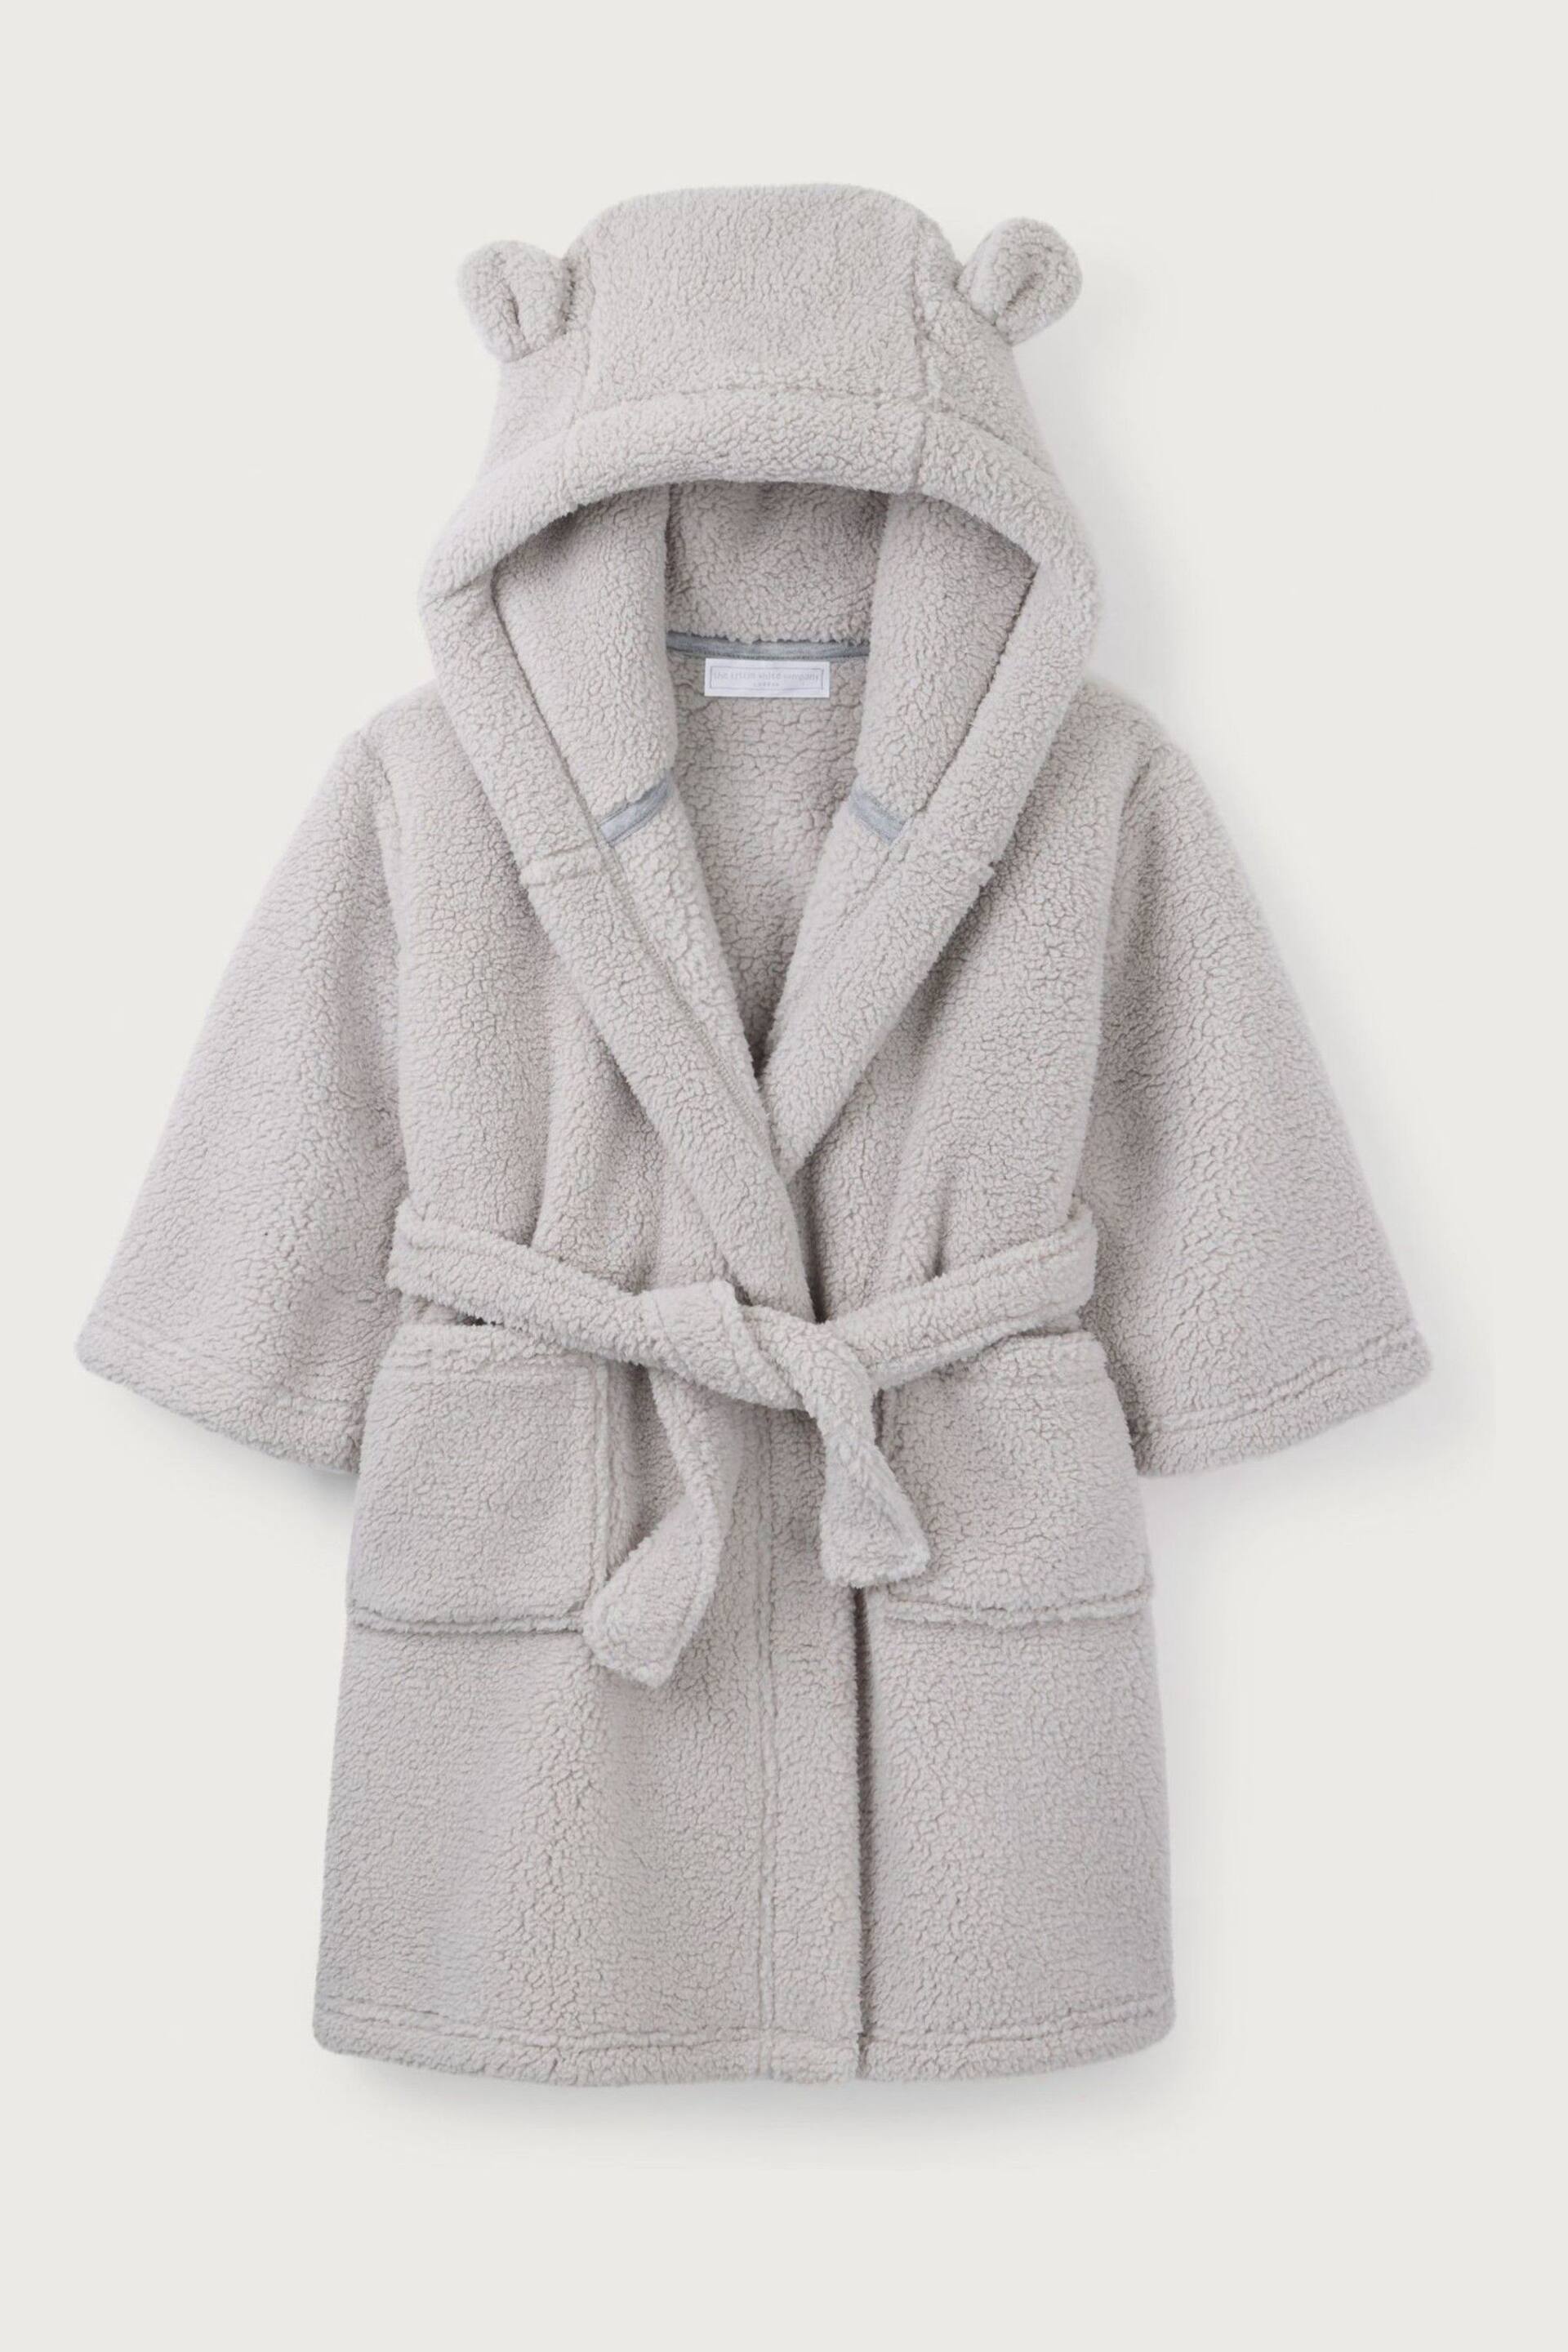 The White Company Grey Teddy Snuggle Robe - Image 1 of 2